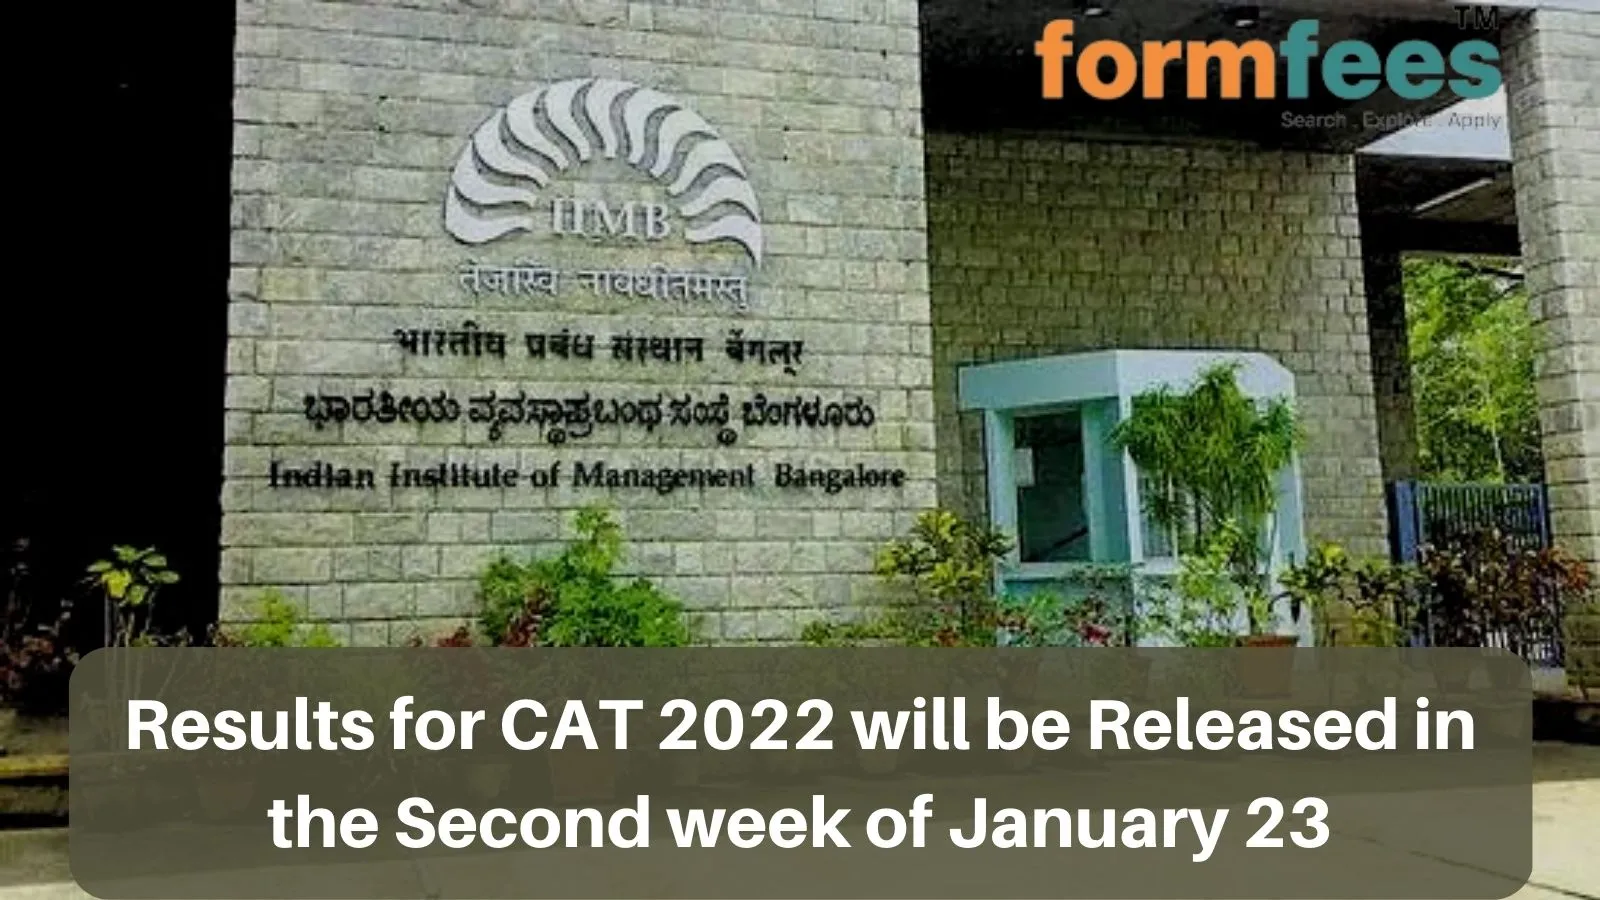 Results for CAT 2022 will be Released in the Second week of January 23